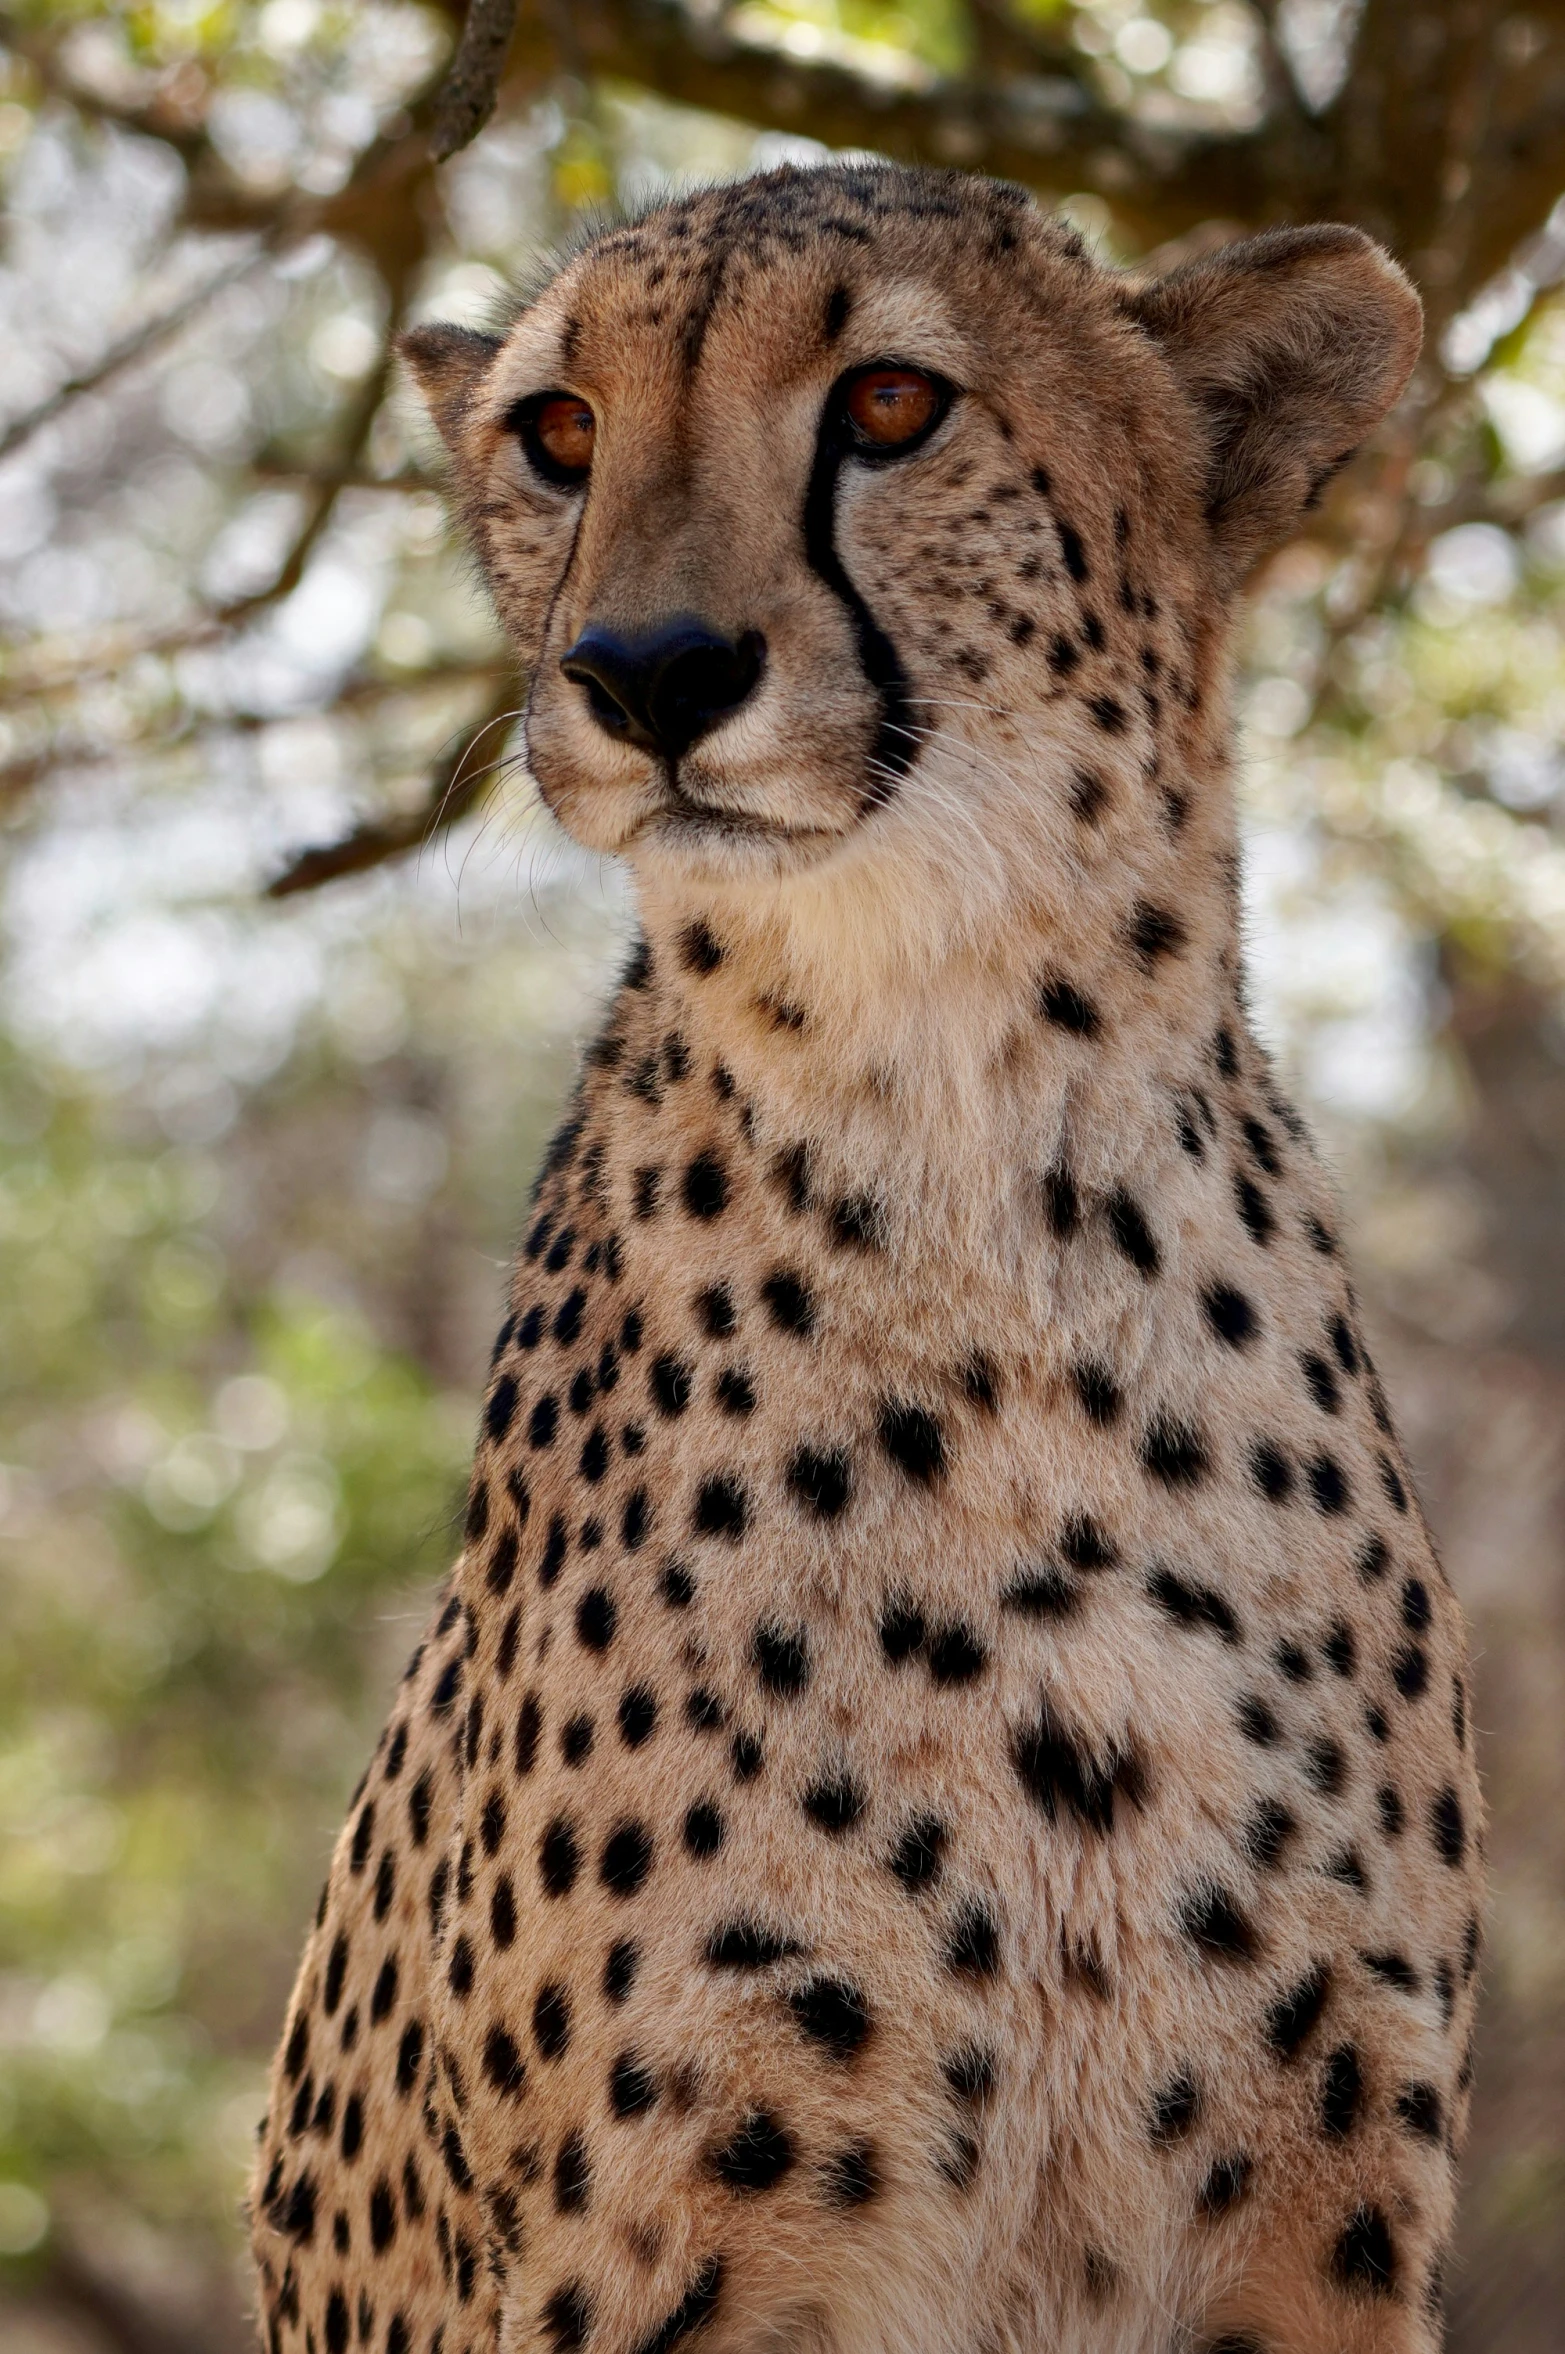 the head and shoulders of a cheetah, against the background of a tree